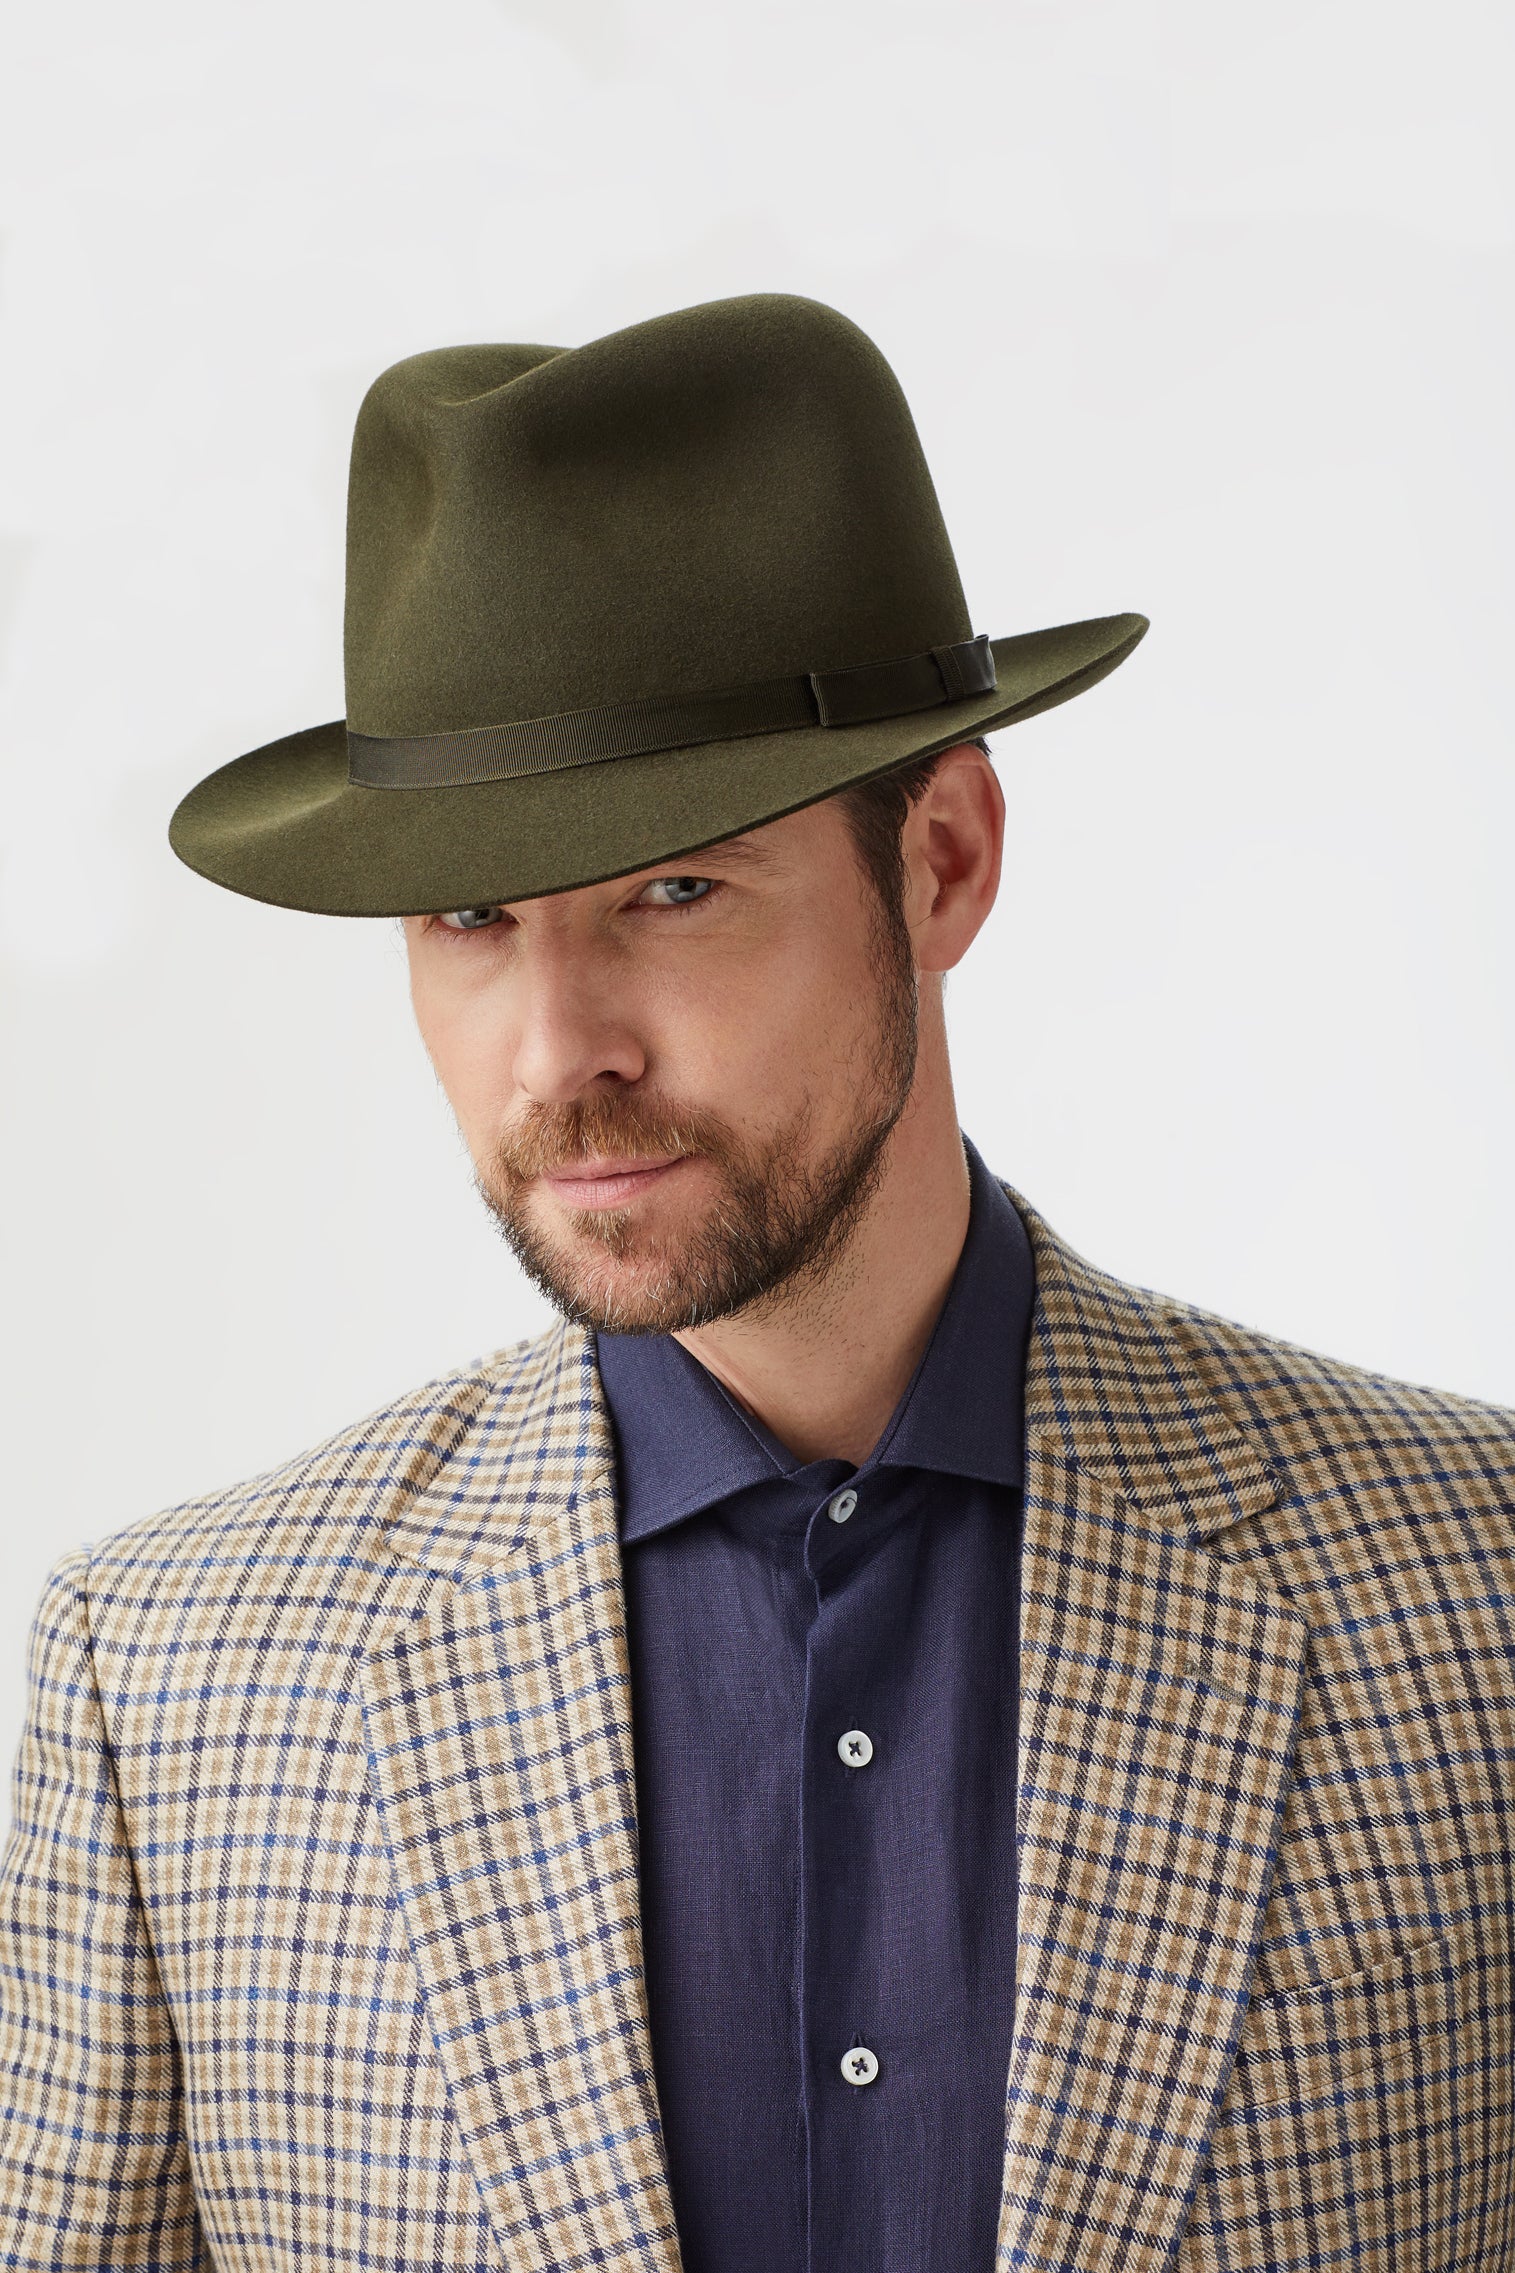 Men's Packable and Rollable Hats & Caps - Lock & Co. Hatters